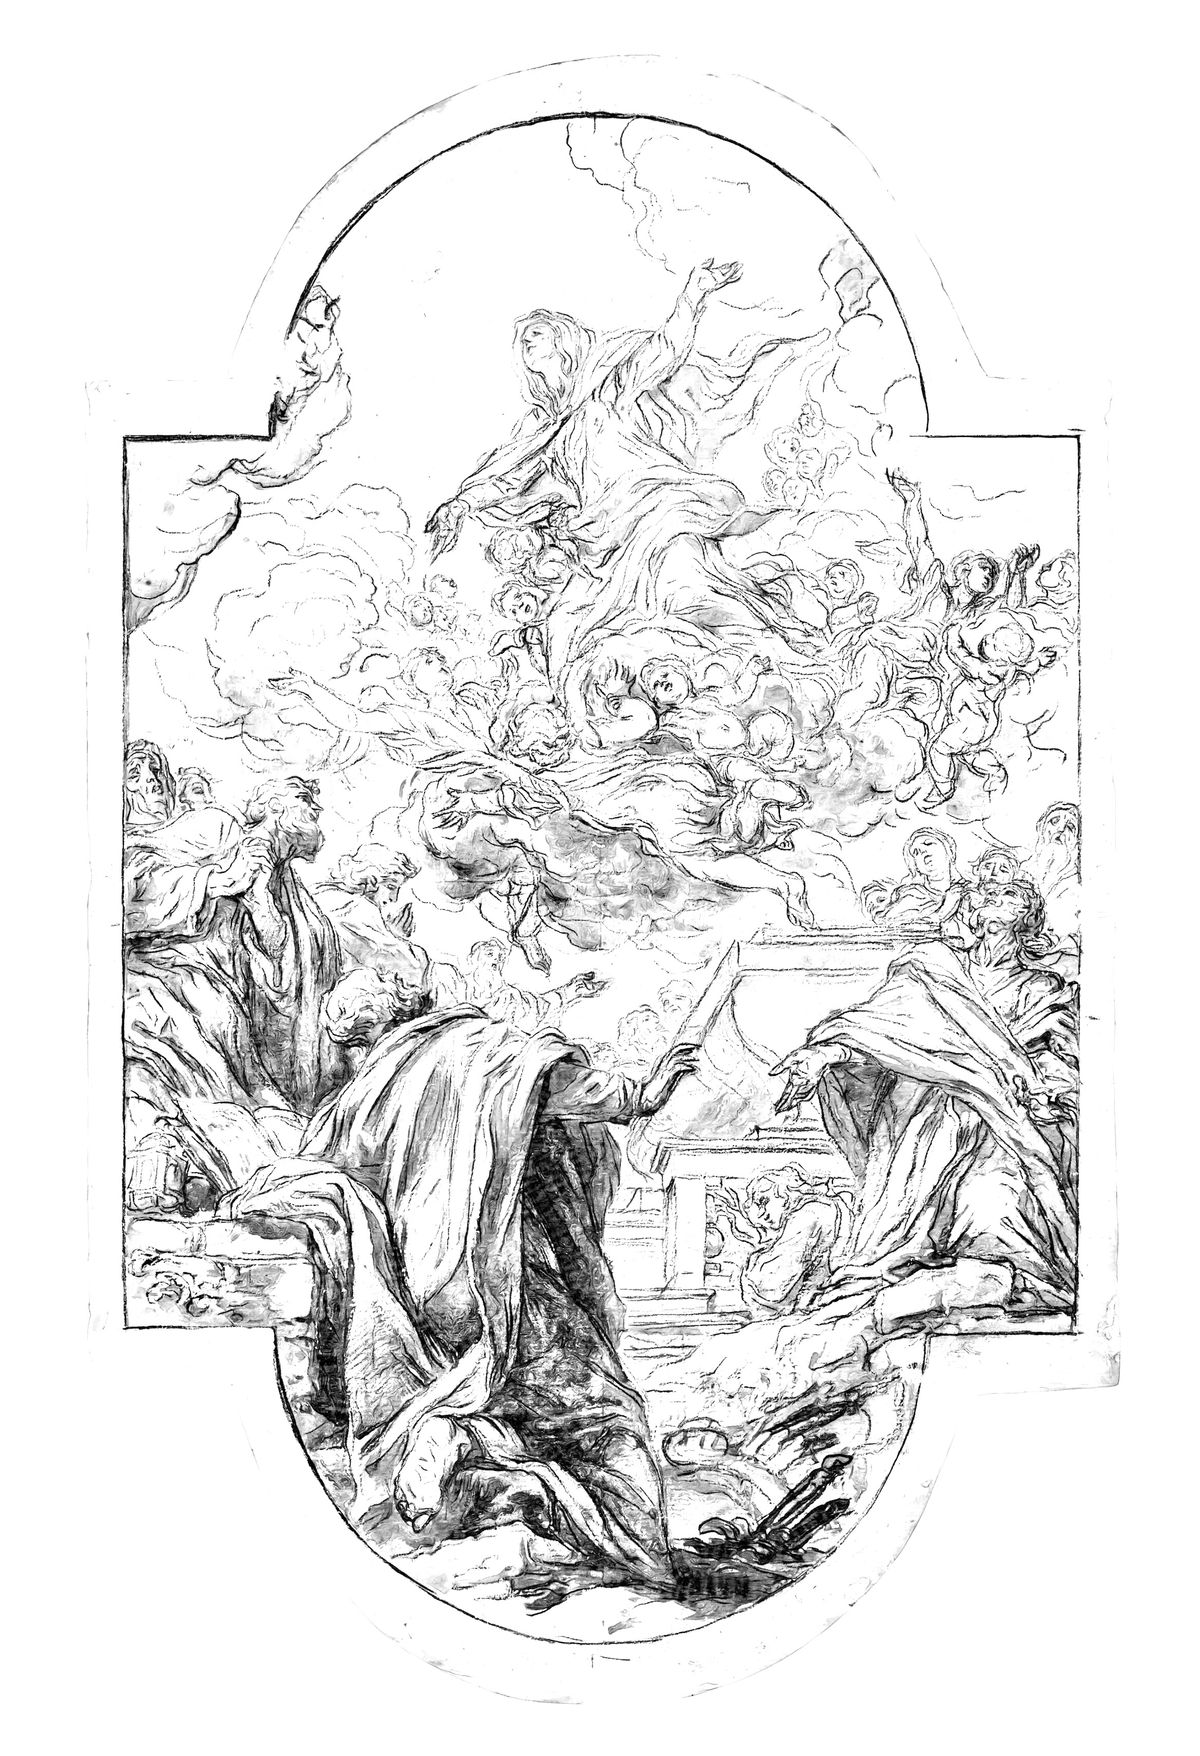 Assumption of the Virgin (1664–1670) by Volterrano - Catholic Coloring Page